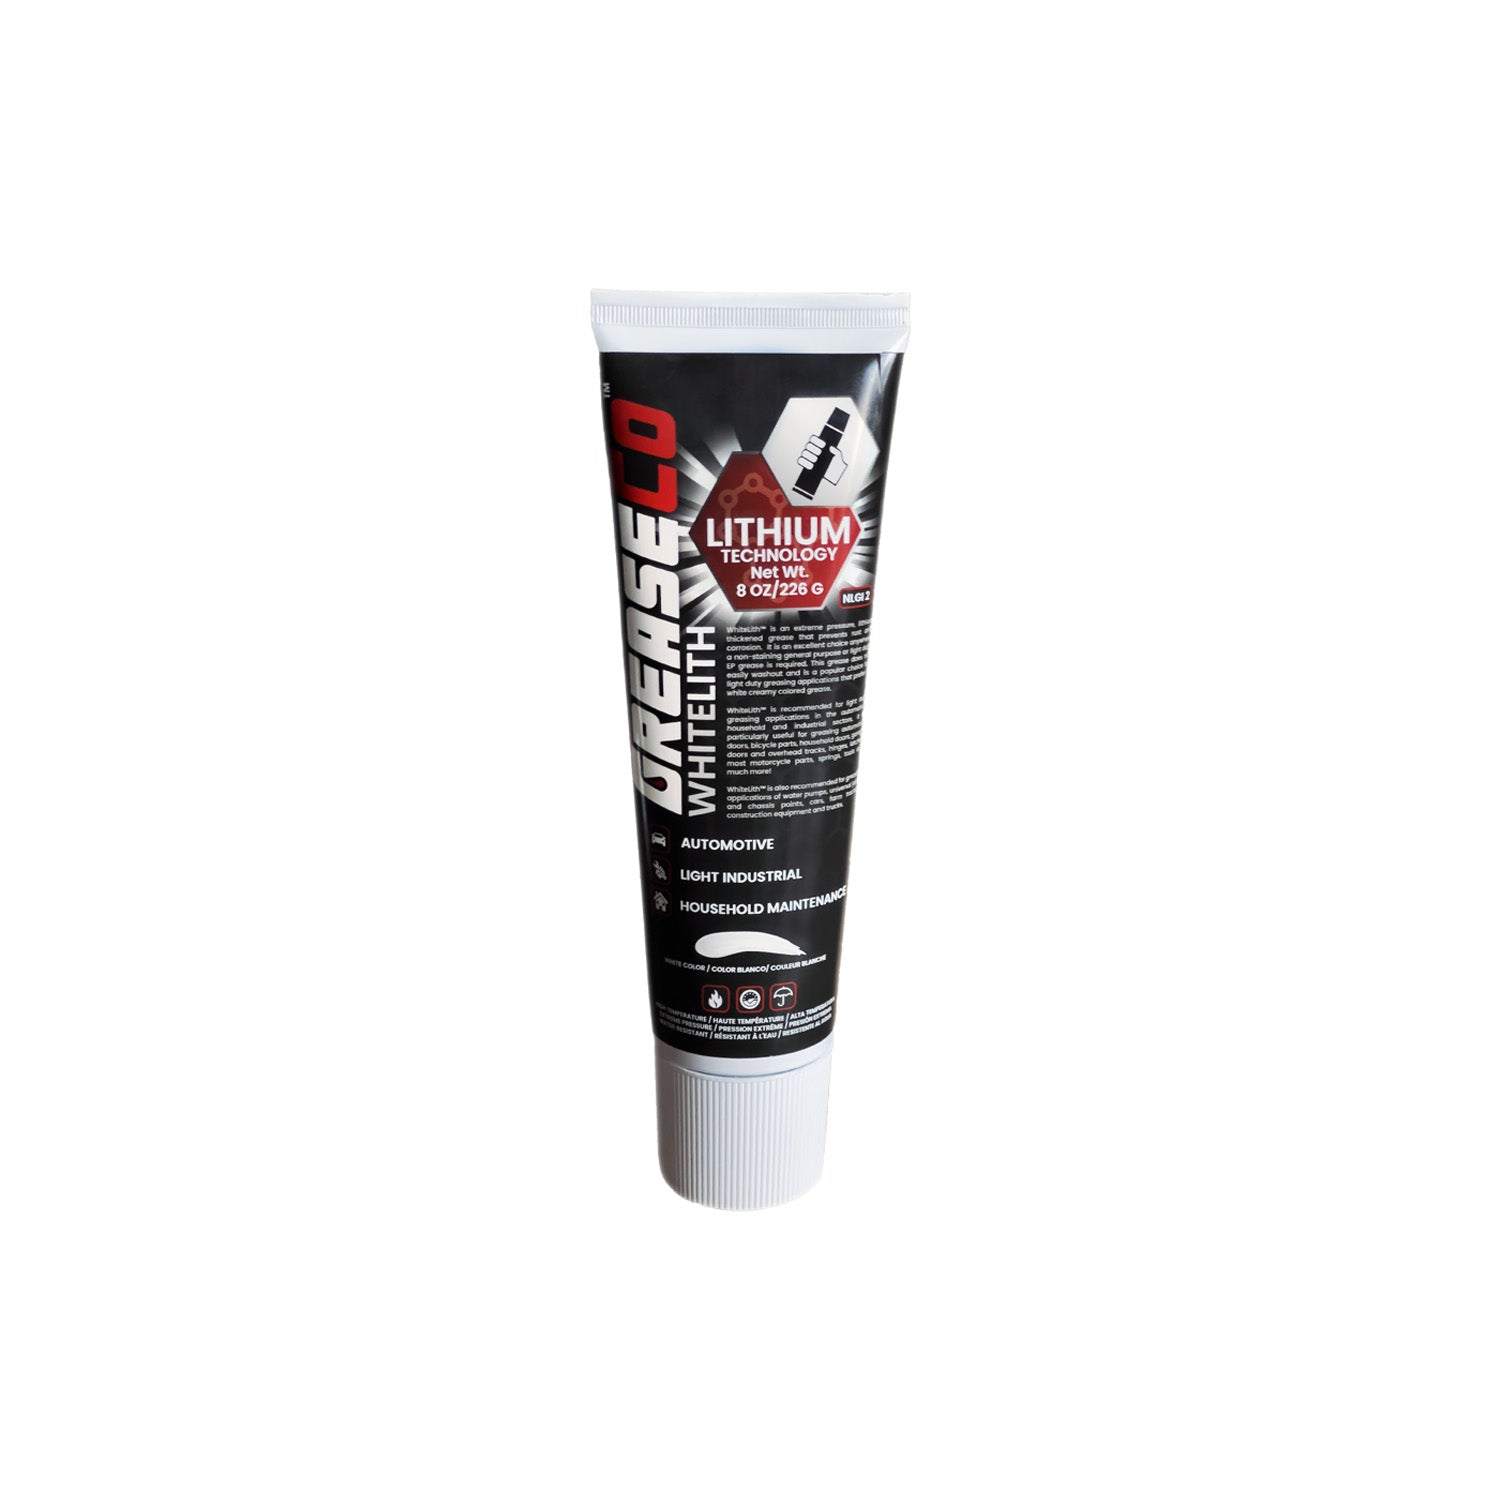 White Lithium Garage Door High Temp High Performance Grease Squeeze Tube of GreaseCo WhiteLith